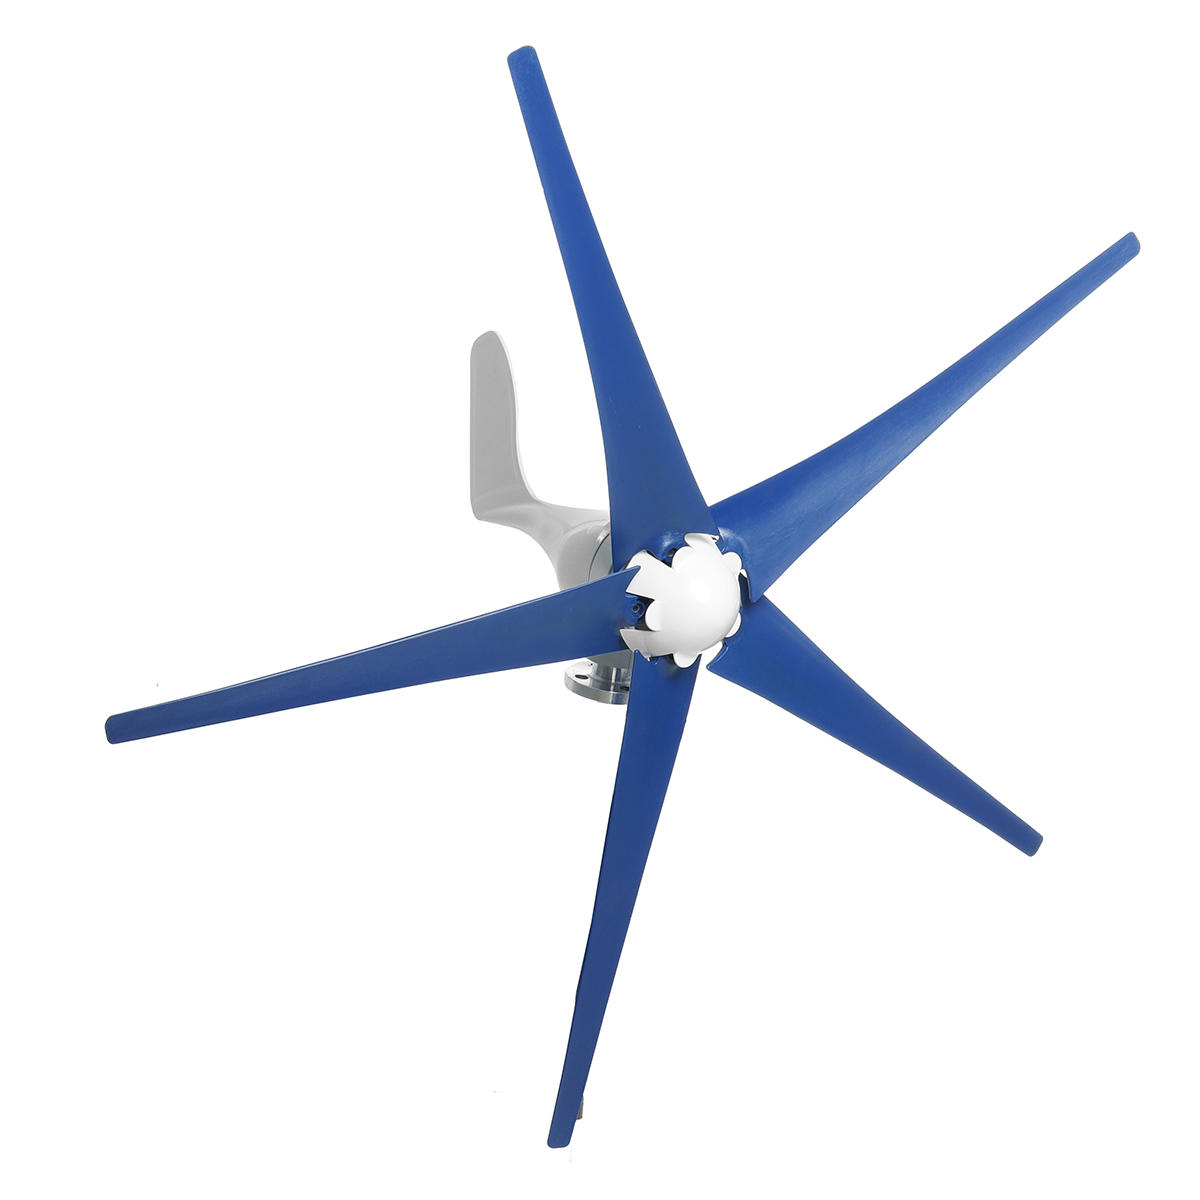 800W 12V/24V 5 Blades Horizontal Wind Turbine Power Generator with Charge Controller